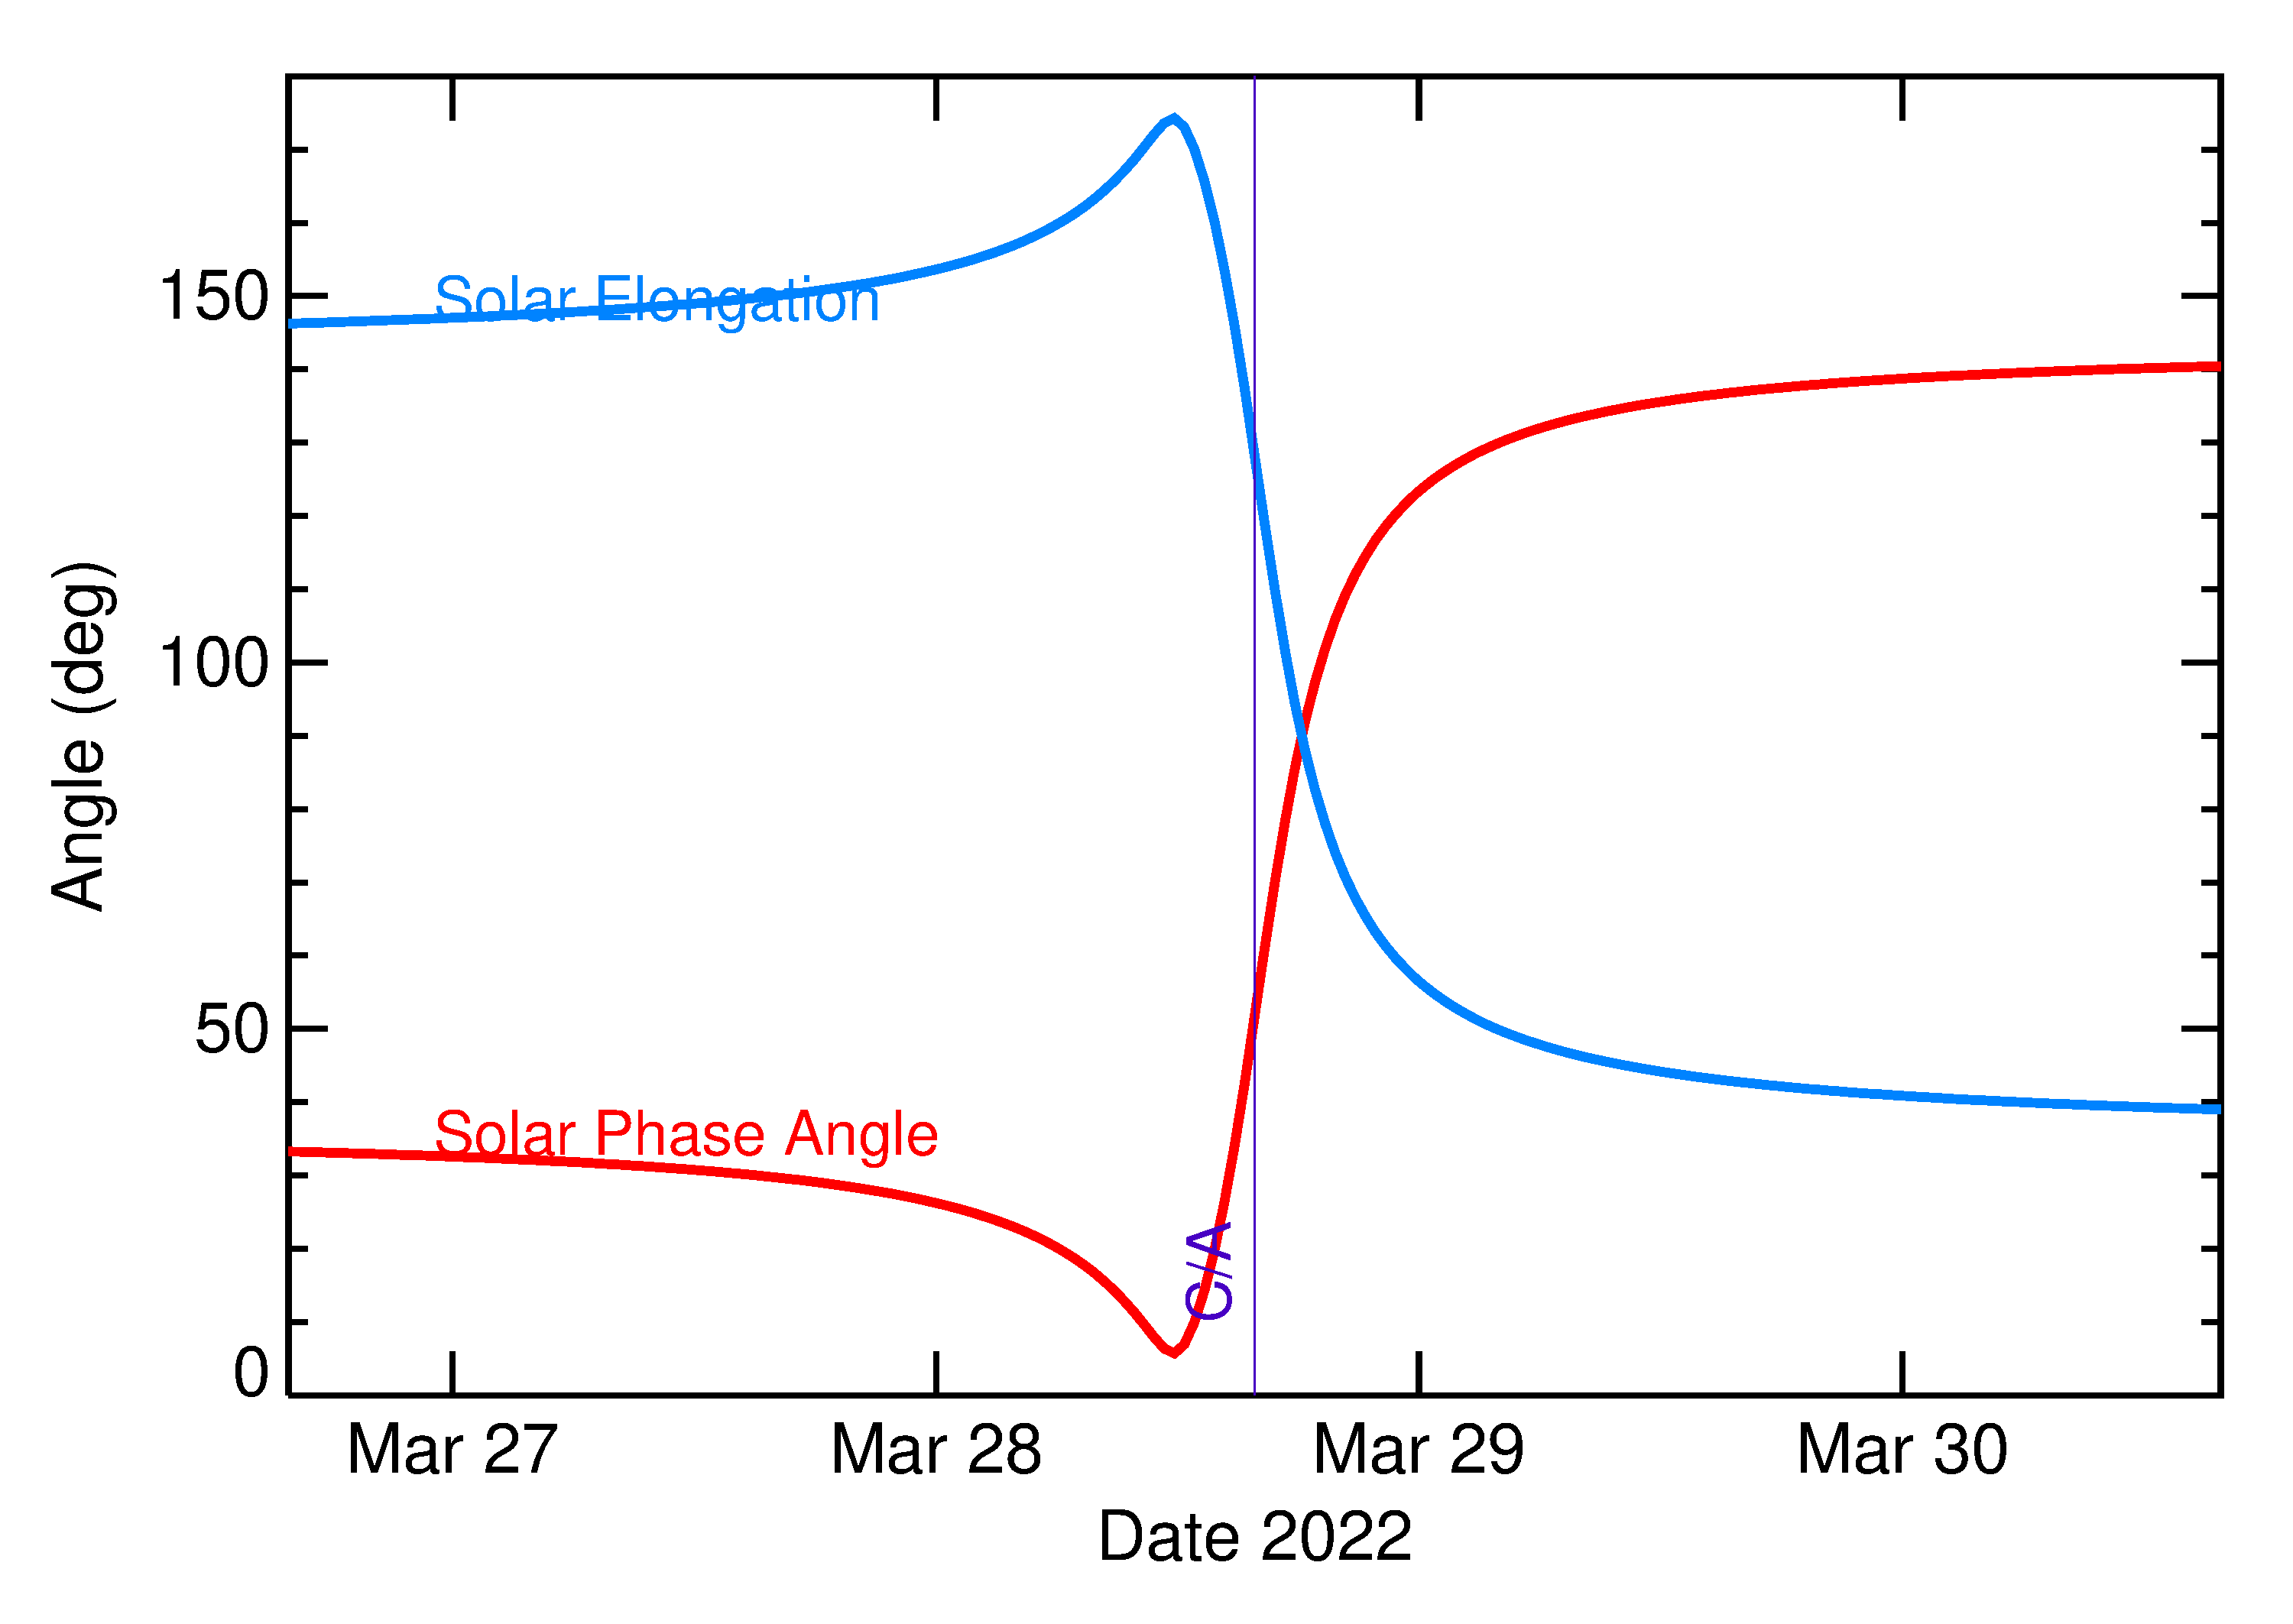 Solar Elongation and Solar Phase Angle of 2022 FB2 in the days around closest approach